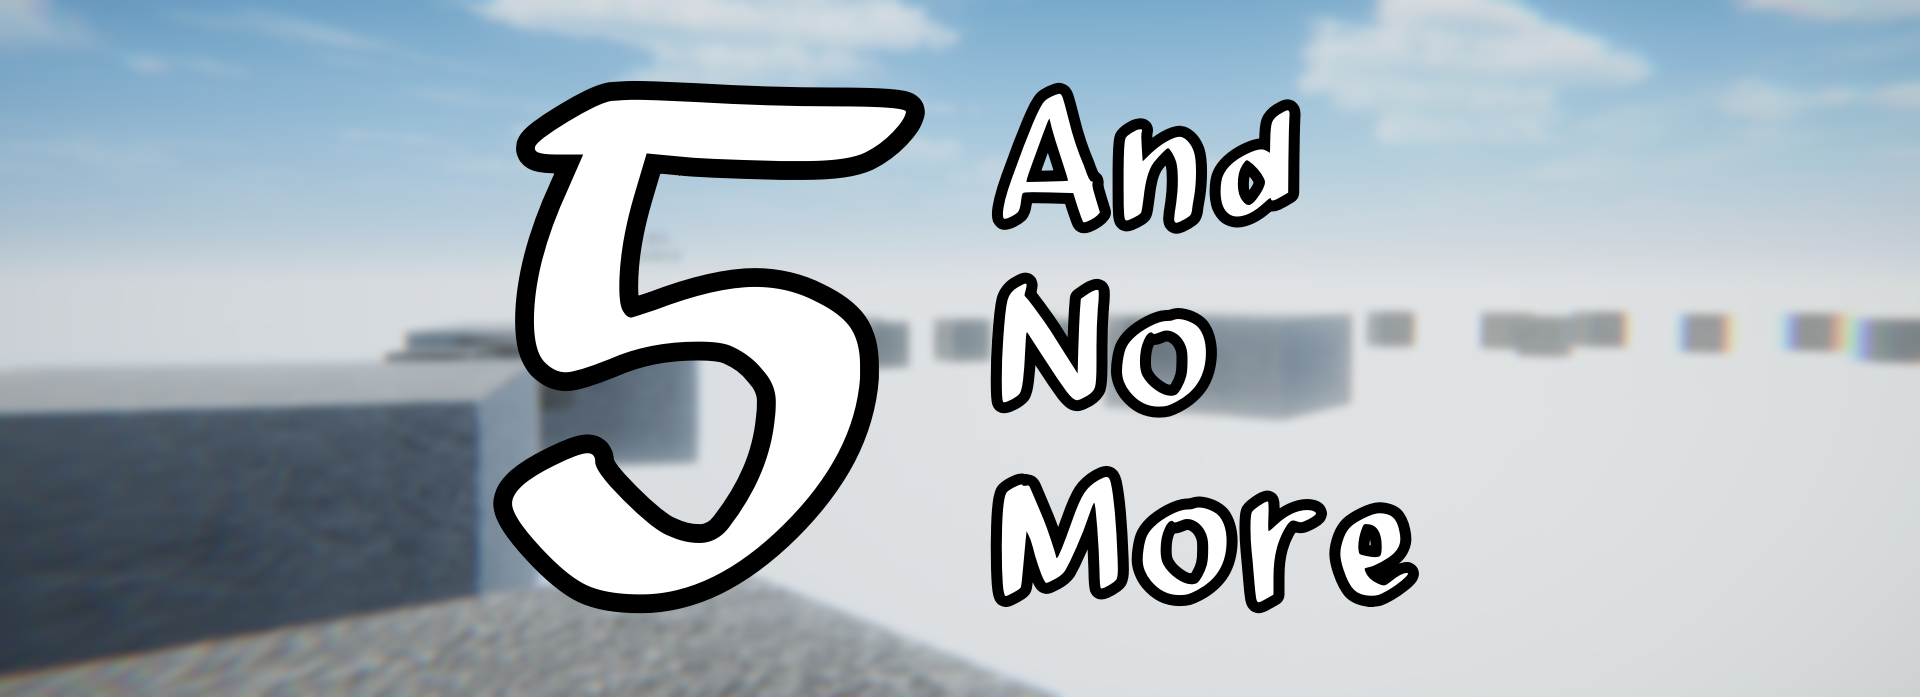 5 And No More